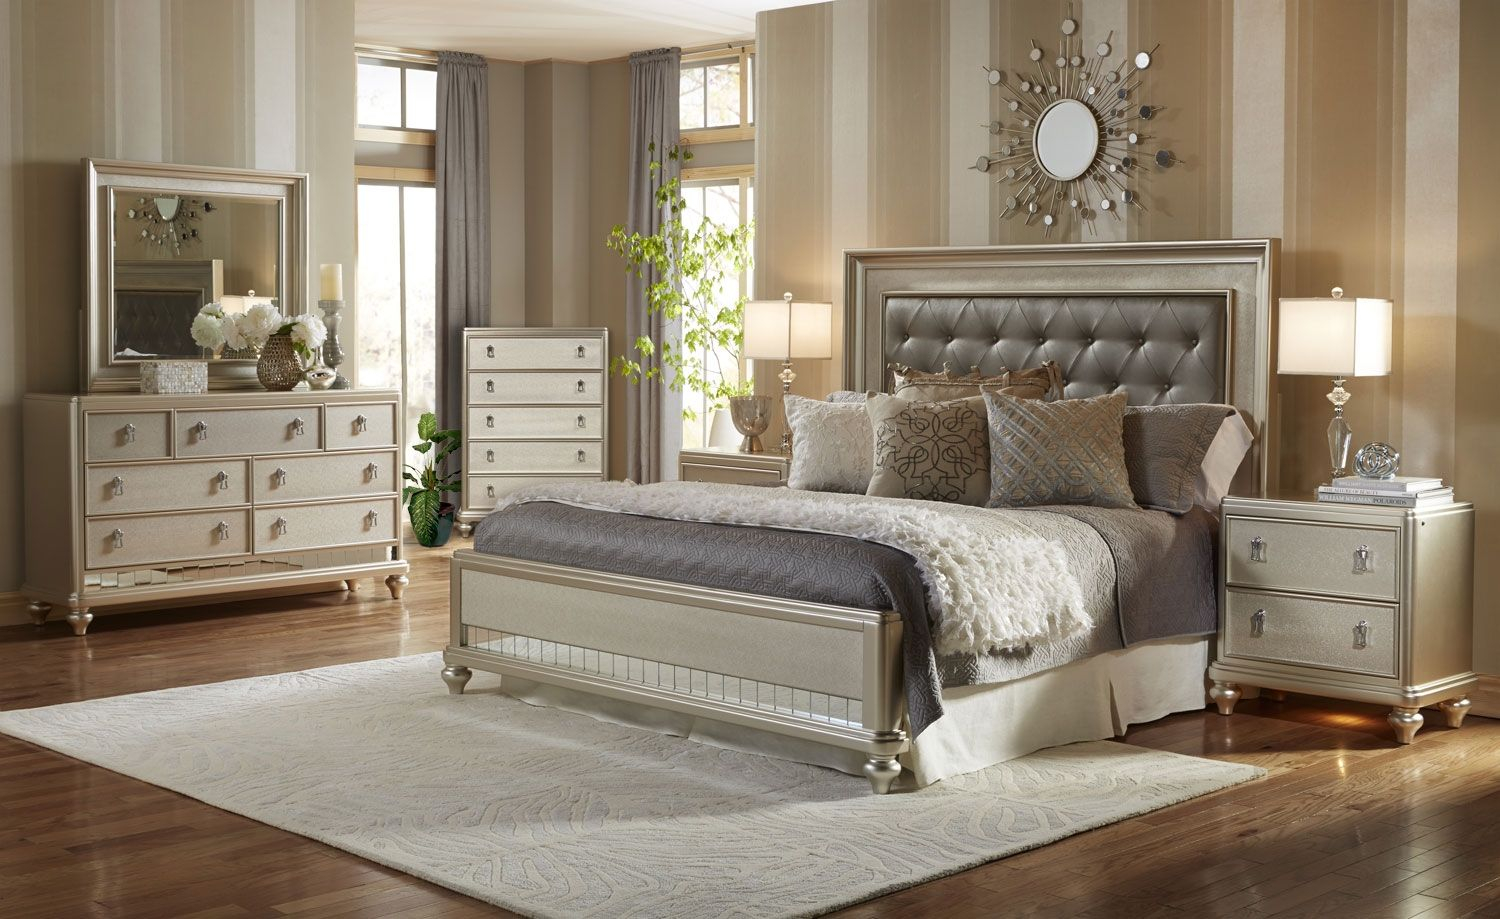 Diva 8 Piece Queen Bedroom Package Interiors Bedrooms intended for dimensions 1500 X 919